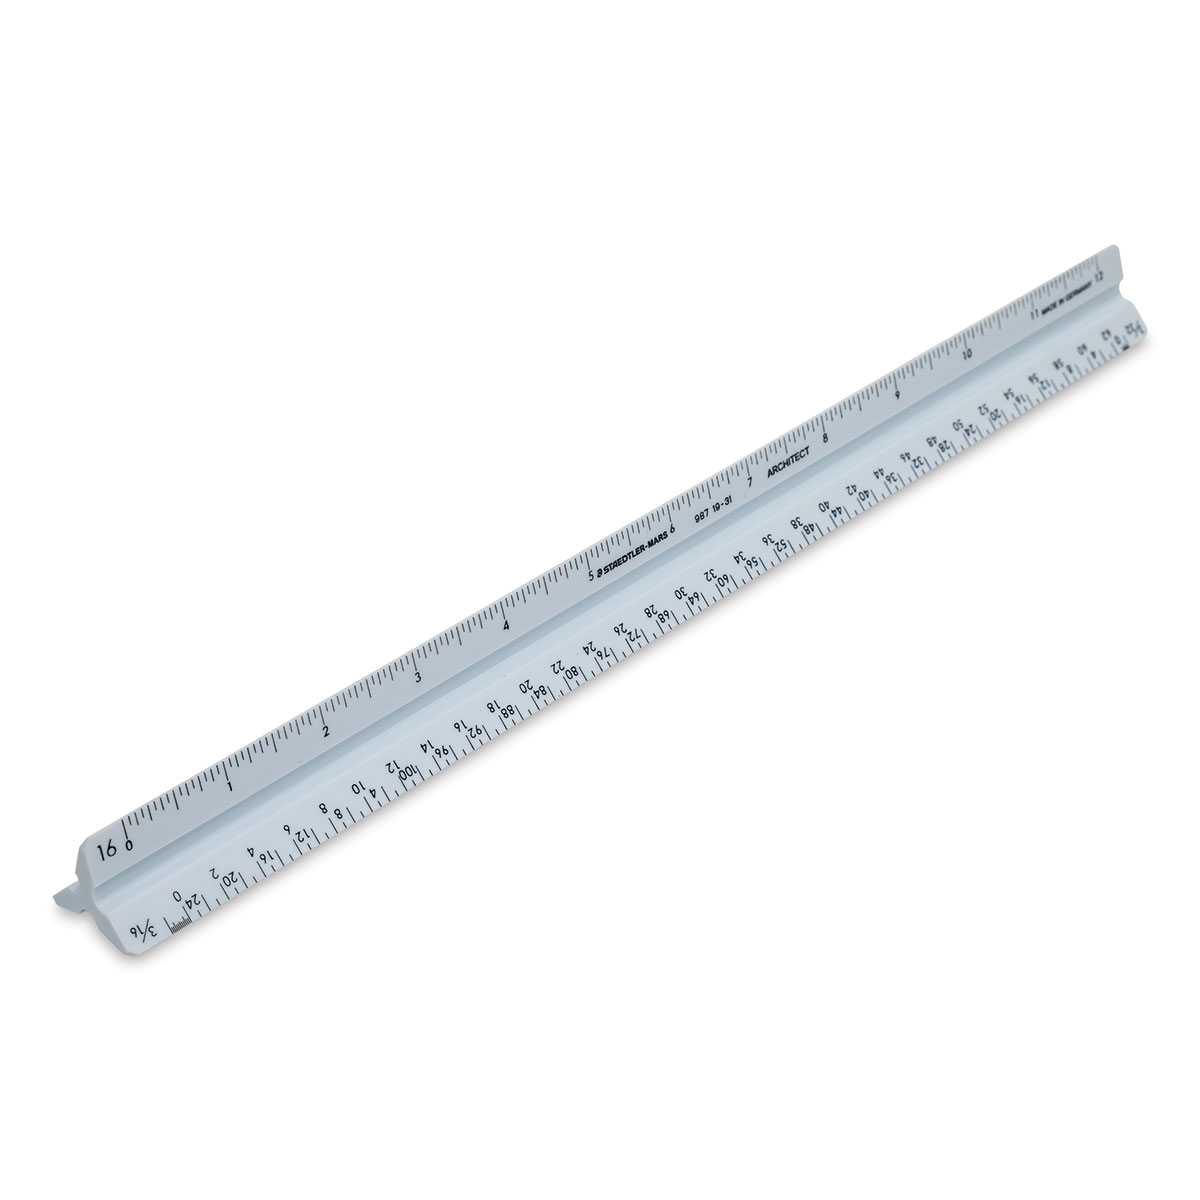 12 Select-A-Scale (TM) Architect Drafting Ruler - 7512